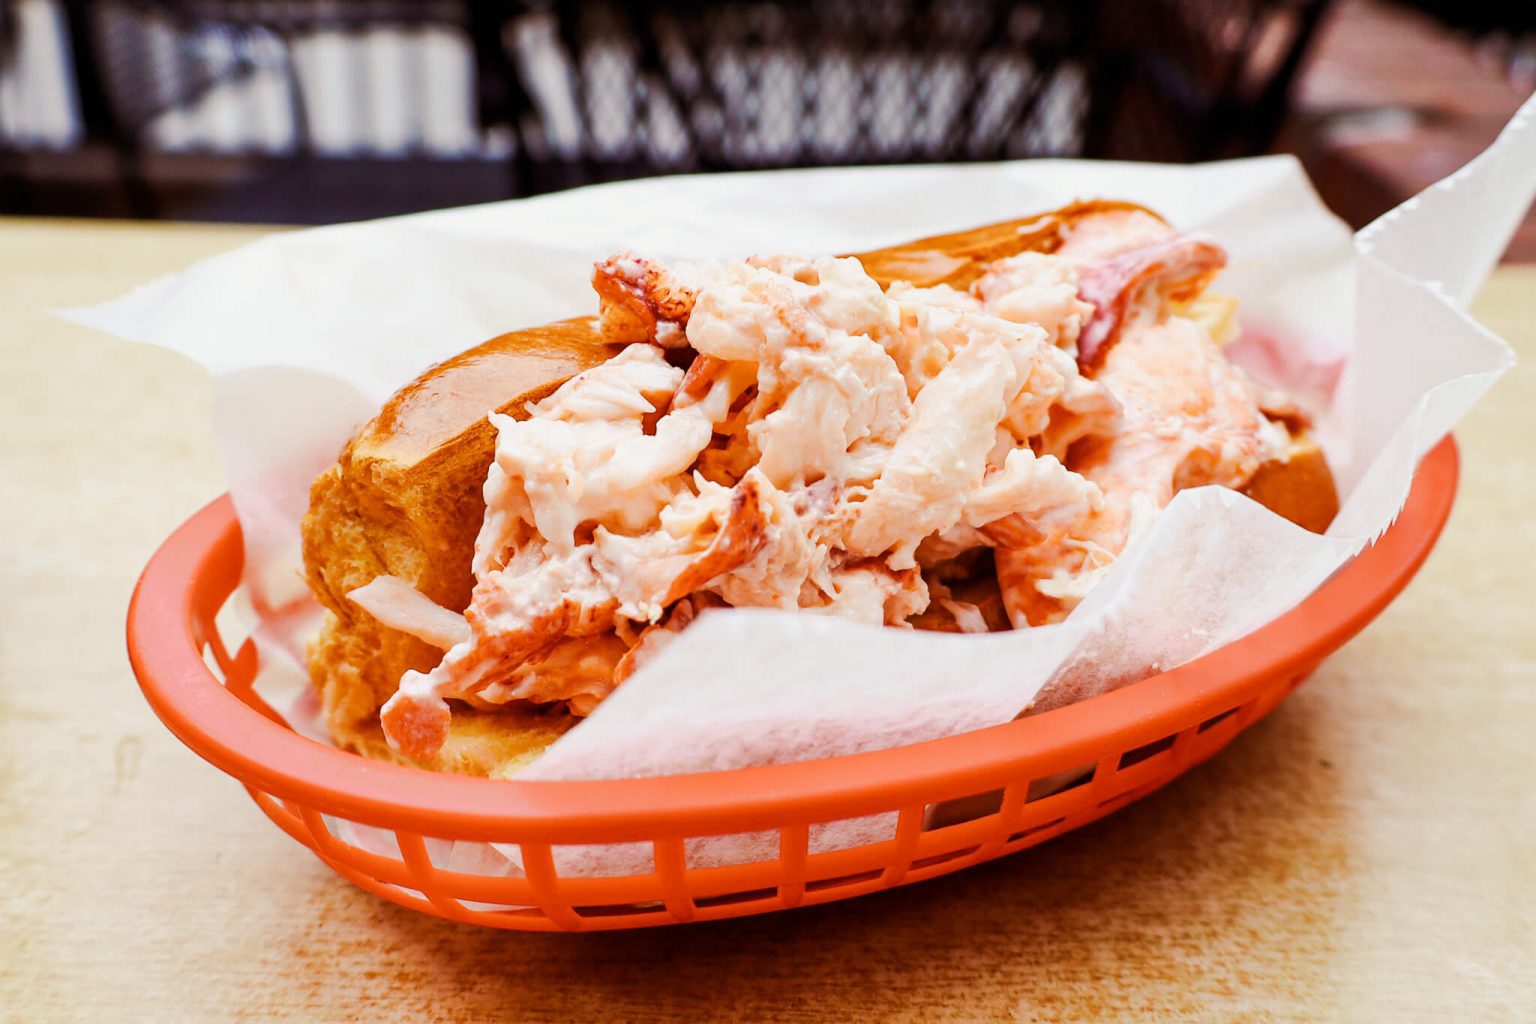 A lobster roll in a red basket.